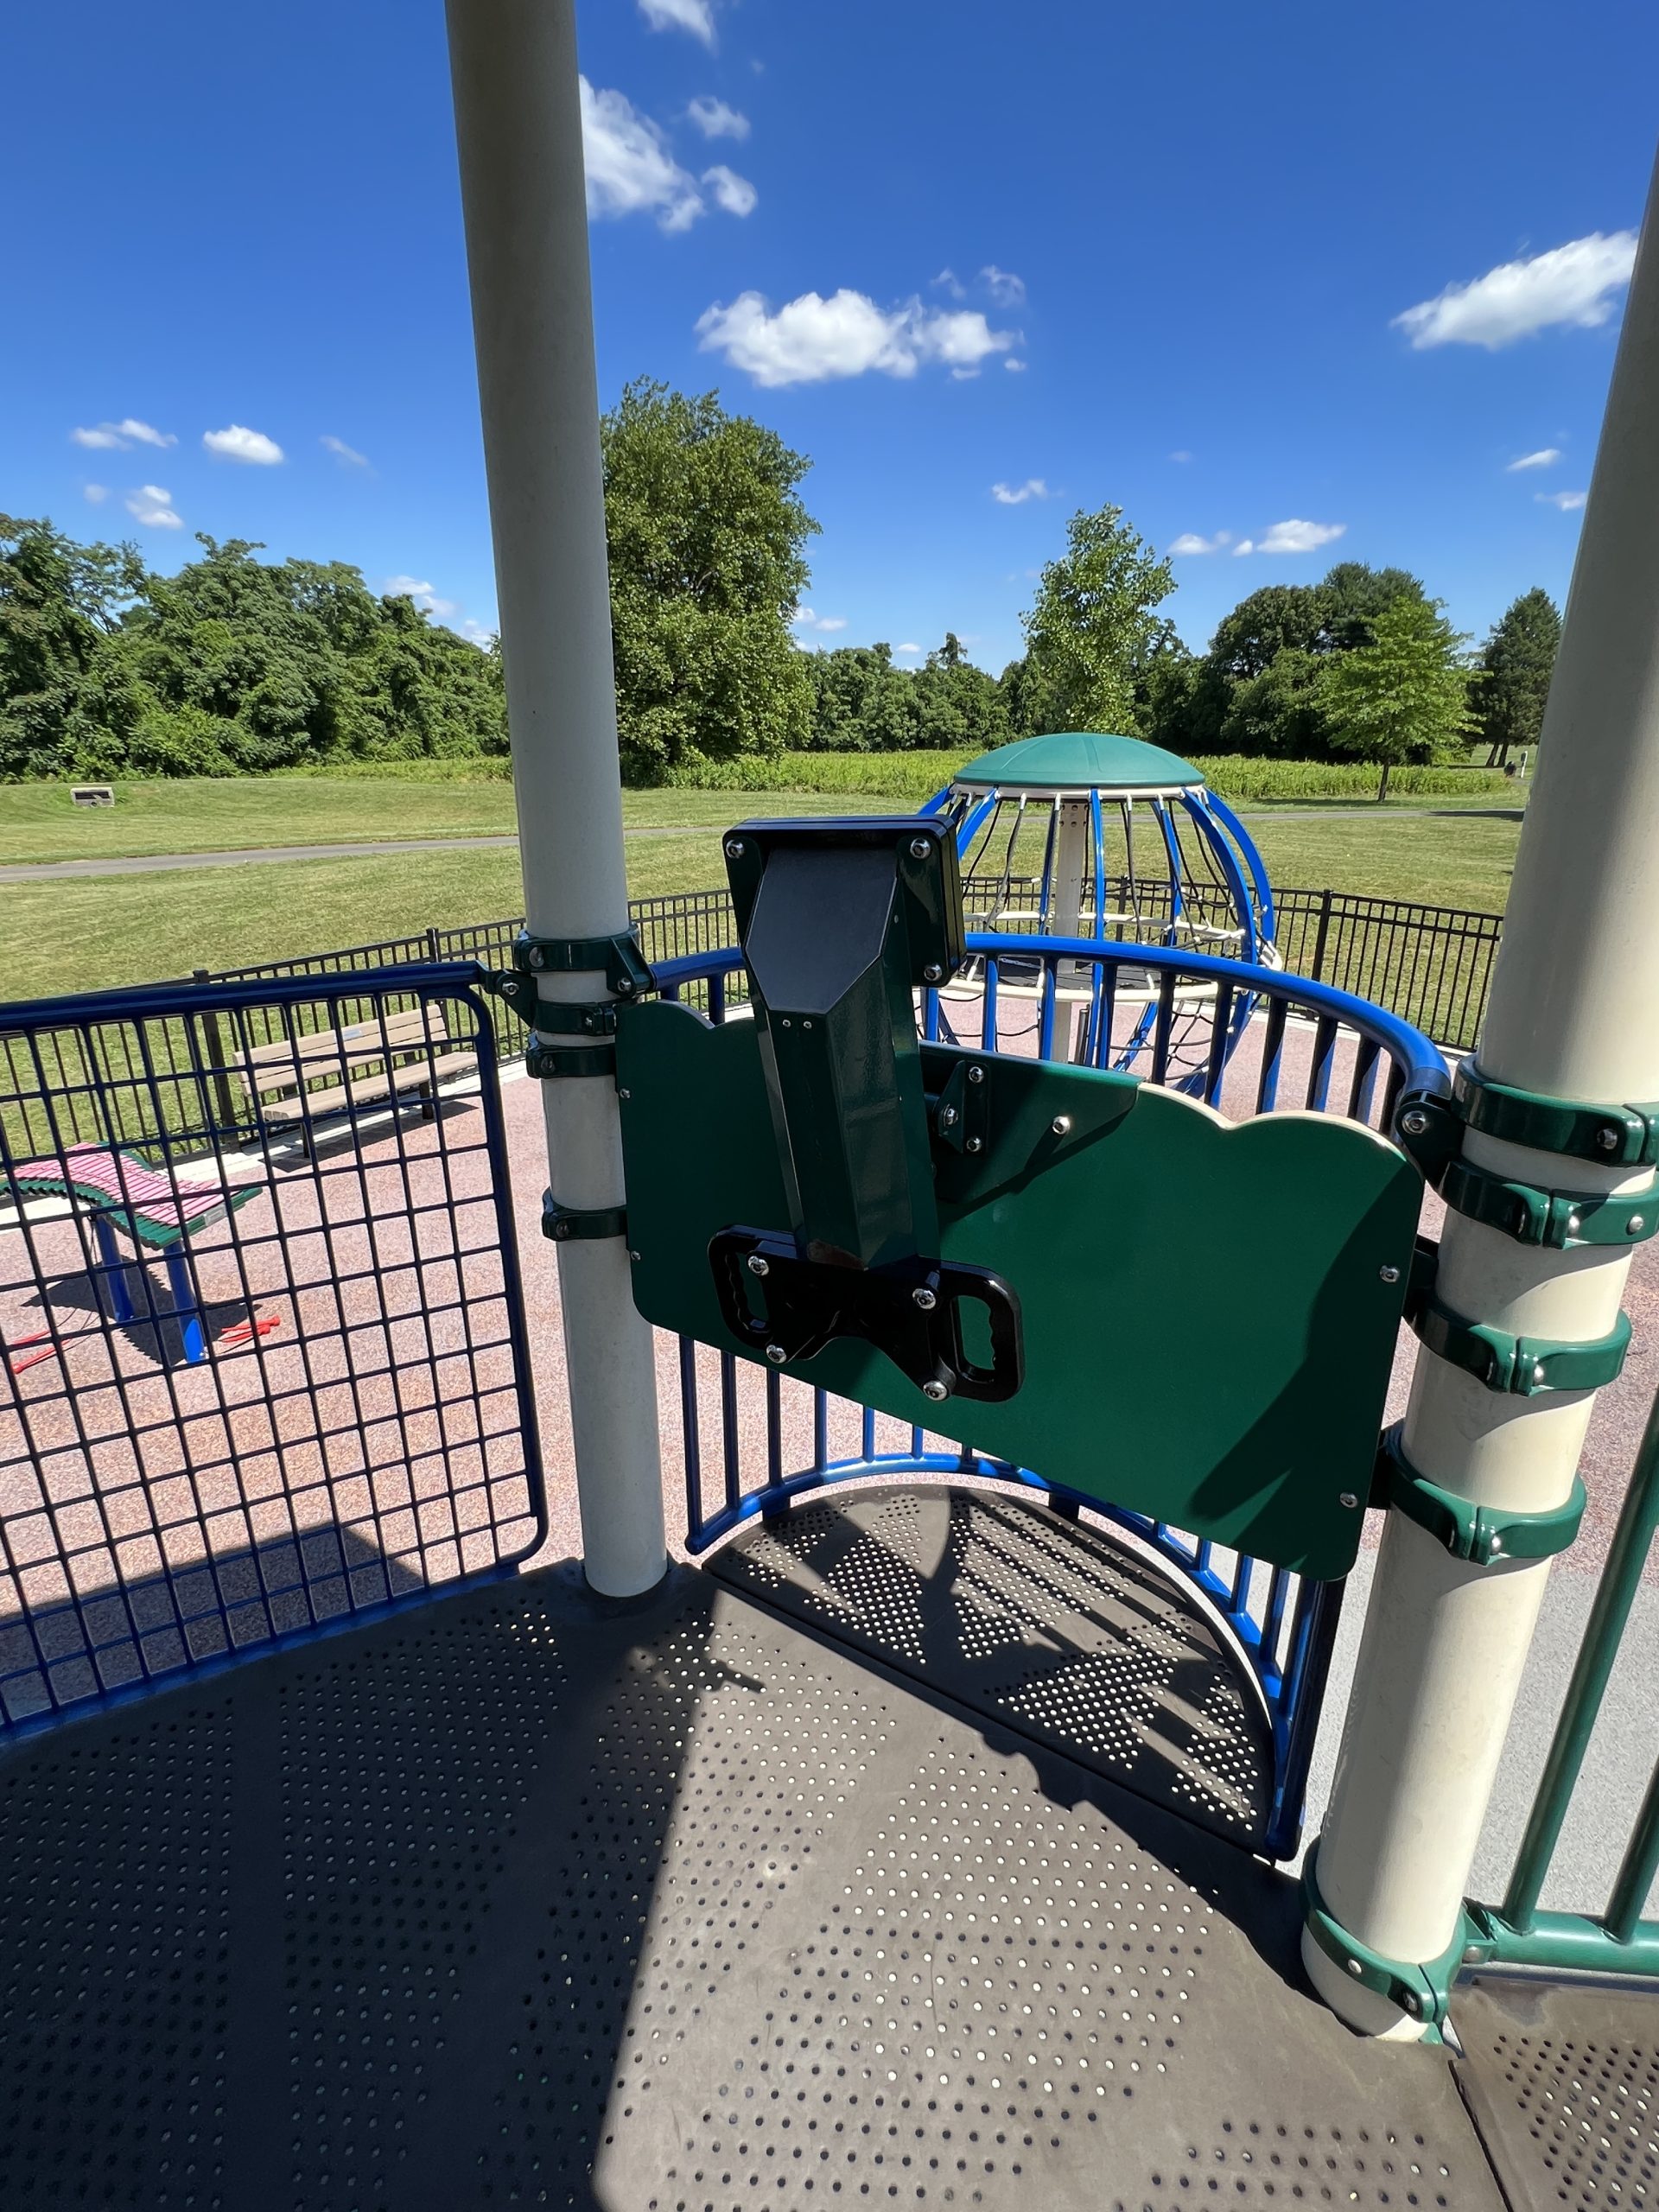 Challenger Place Park Playground in Colts Neck NJ viewfinder periscope